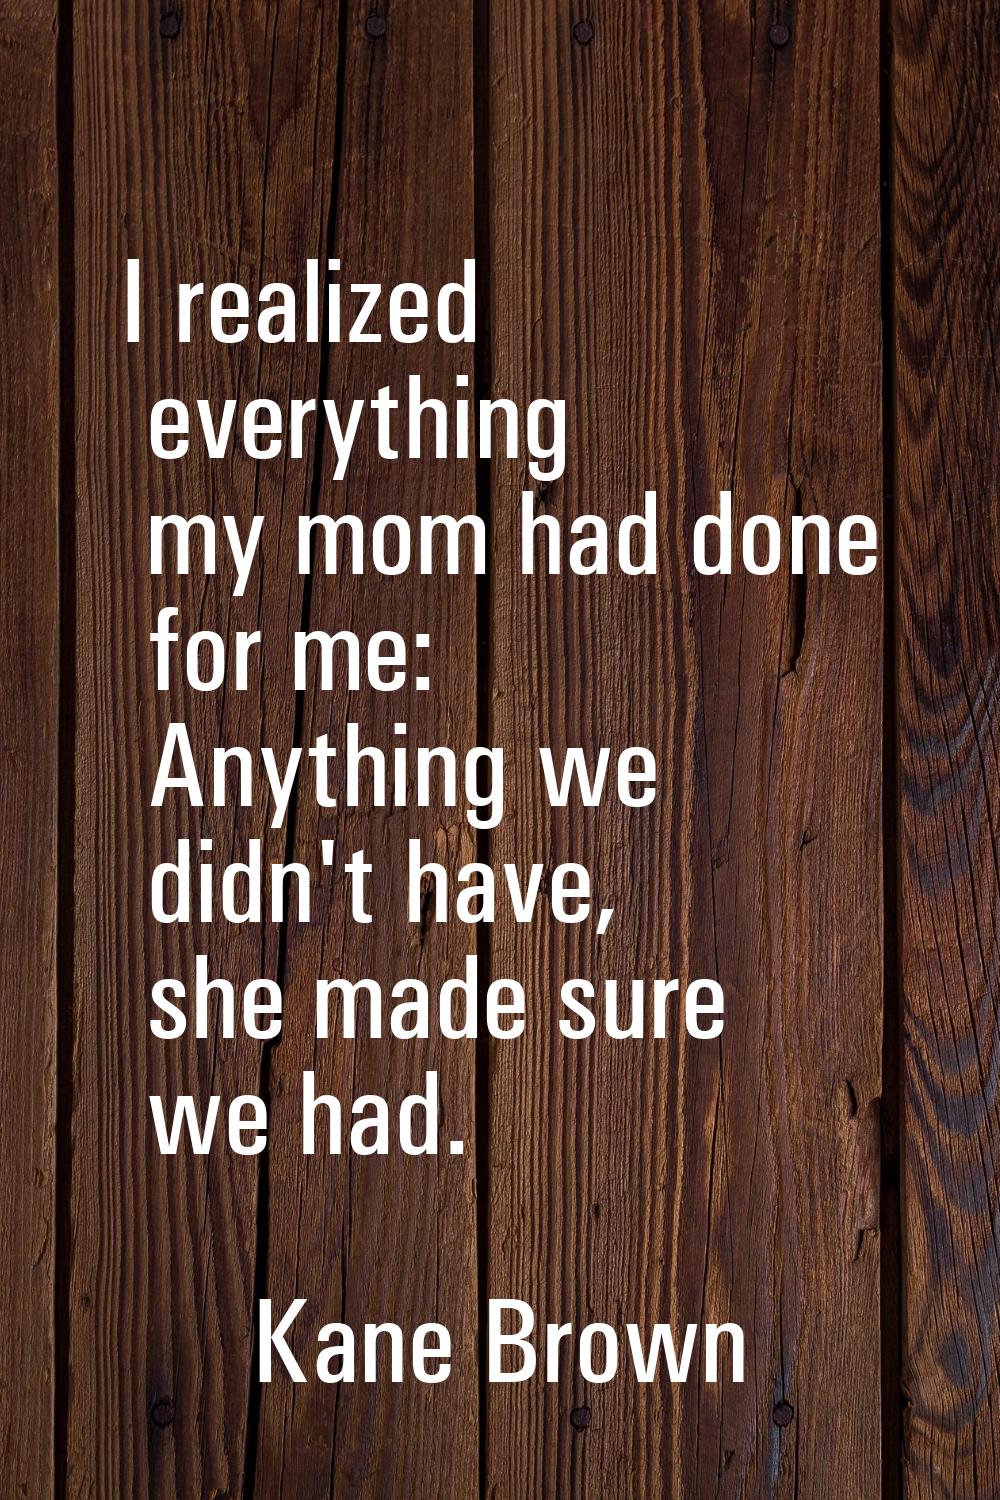 I realized everything my mom had done for me: Anything we didn't have, she made sure we had.